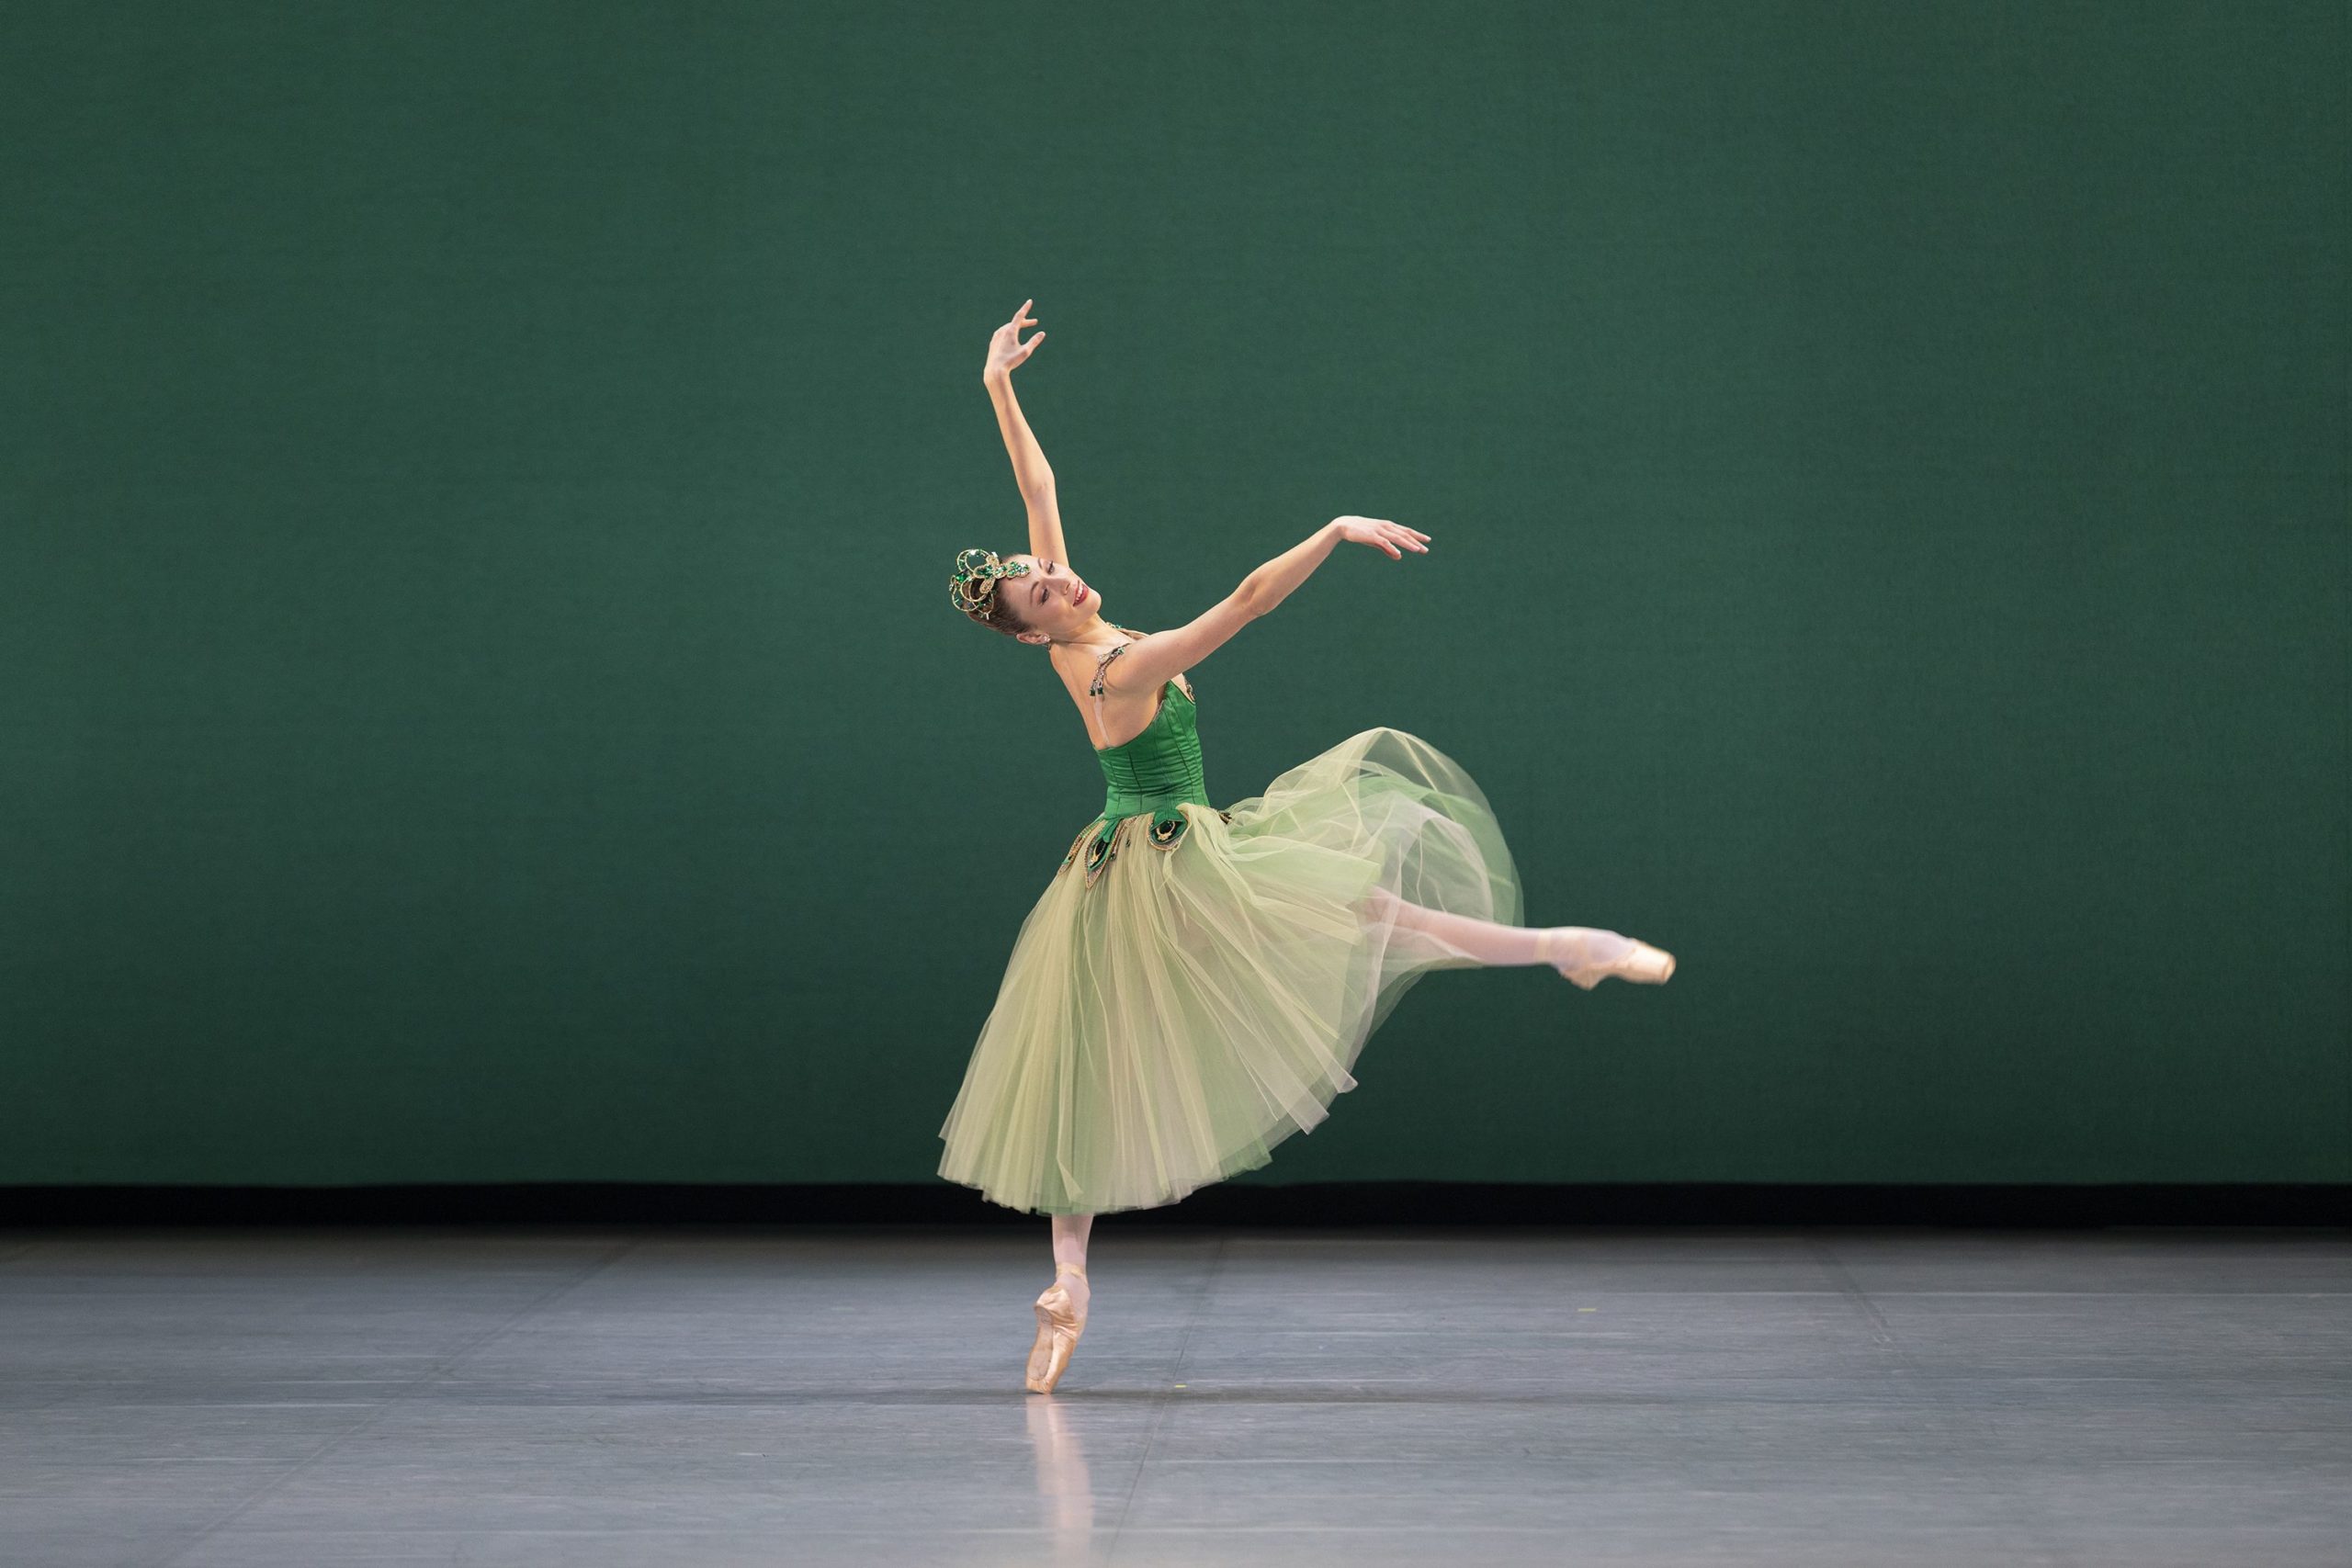 During a performance of Emeralds onstage, Emma Riis-Kofoed performs a small battement front with her right leg, slightly falling off pointe on her left leg. She holds her amrs in third arabesque position and wears a green Romantic tutu and large crown covered in emerald-colored rhinestones.